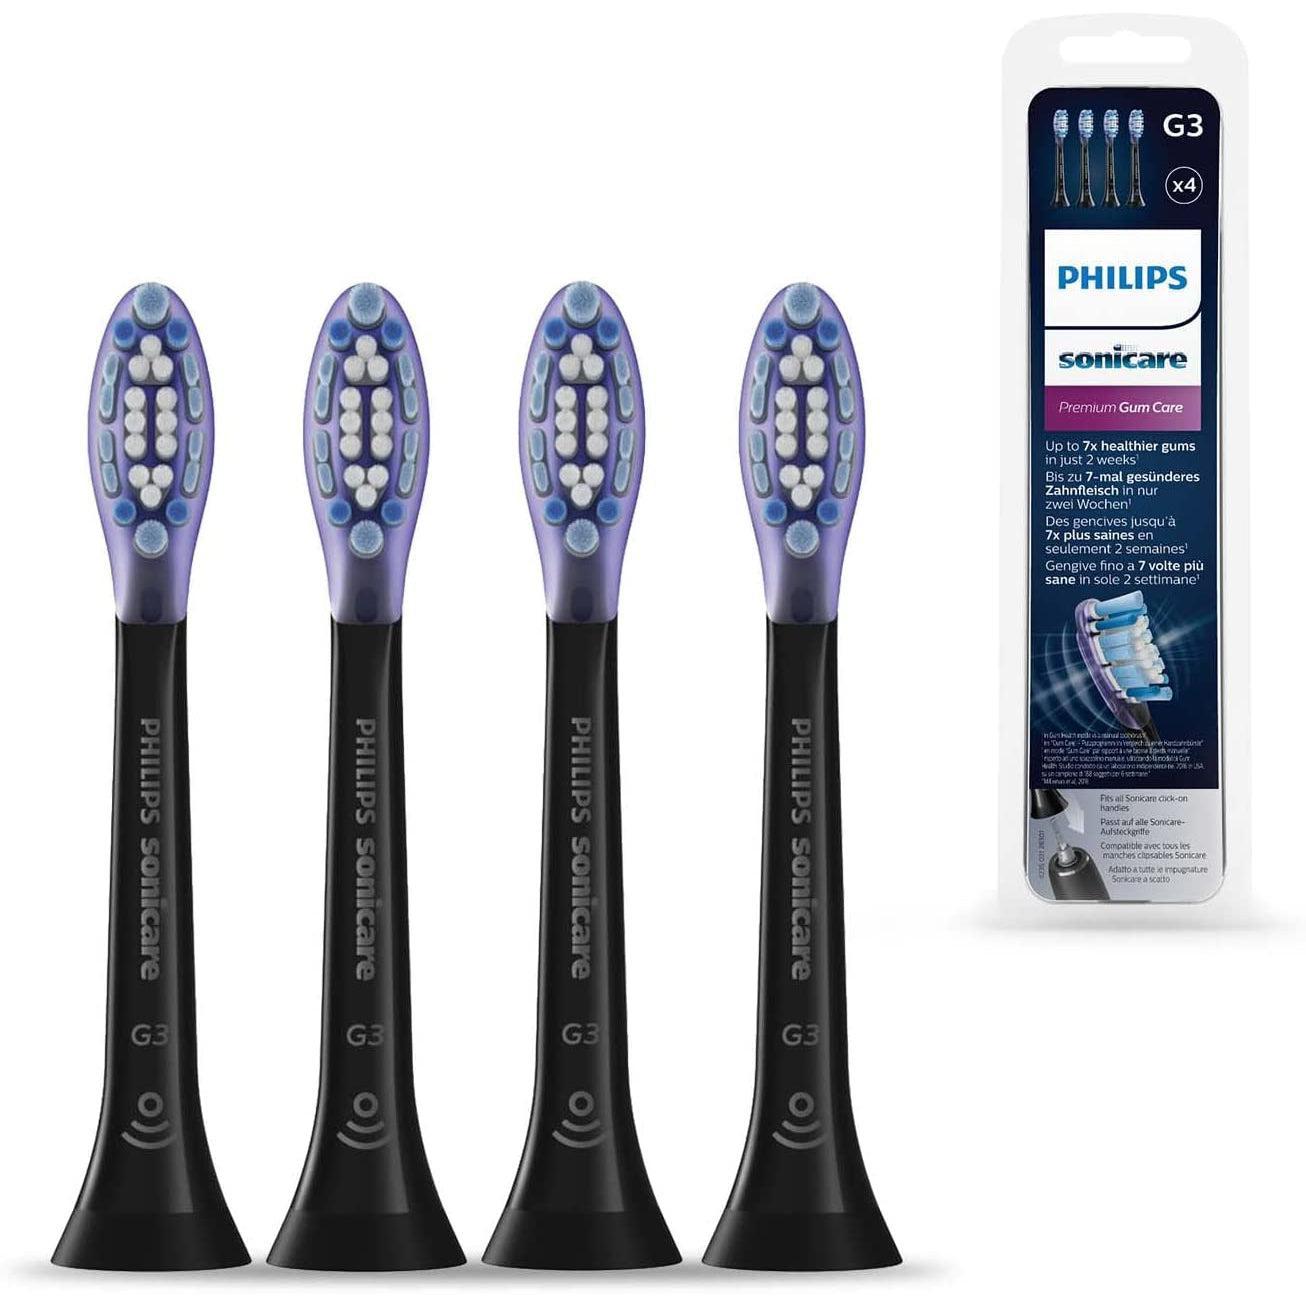 Philips Sonicare HX9054/33 Premium Gum Care Black BrushSync Heads (Compatible with all Philips Sonicare Handles), 4 Pack